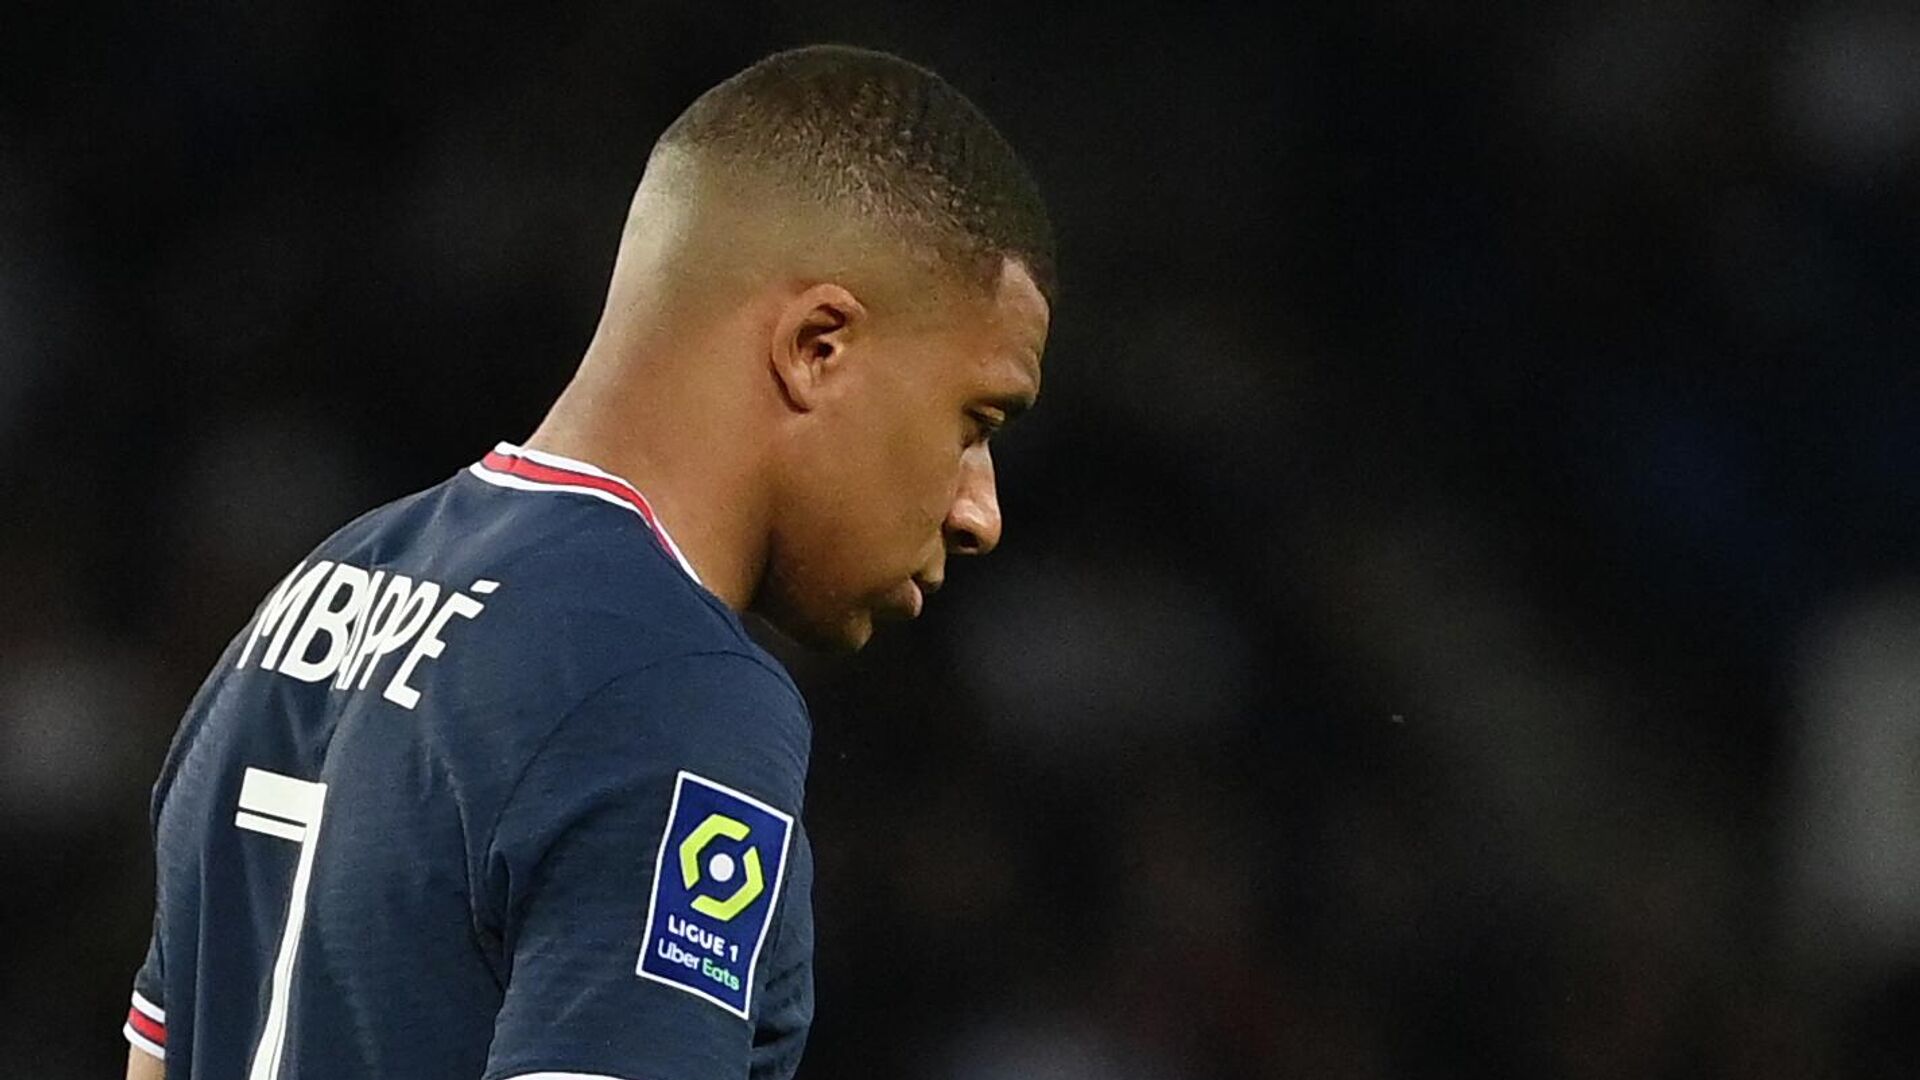 Paris Saint-Germain's French forward Kylian Mbappe reacts at the end of the French L1 football match between Paris-Saint Germain (PSG) and ES Troyes AC at The Parc des Princes Stadium in Paris on May 8, 2022 - Sputnik International, 1920, 19.05.2022